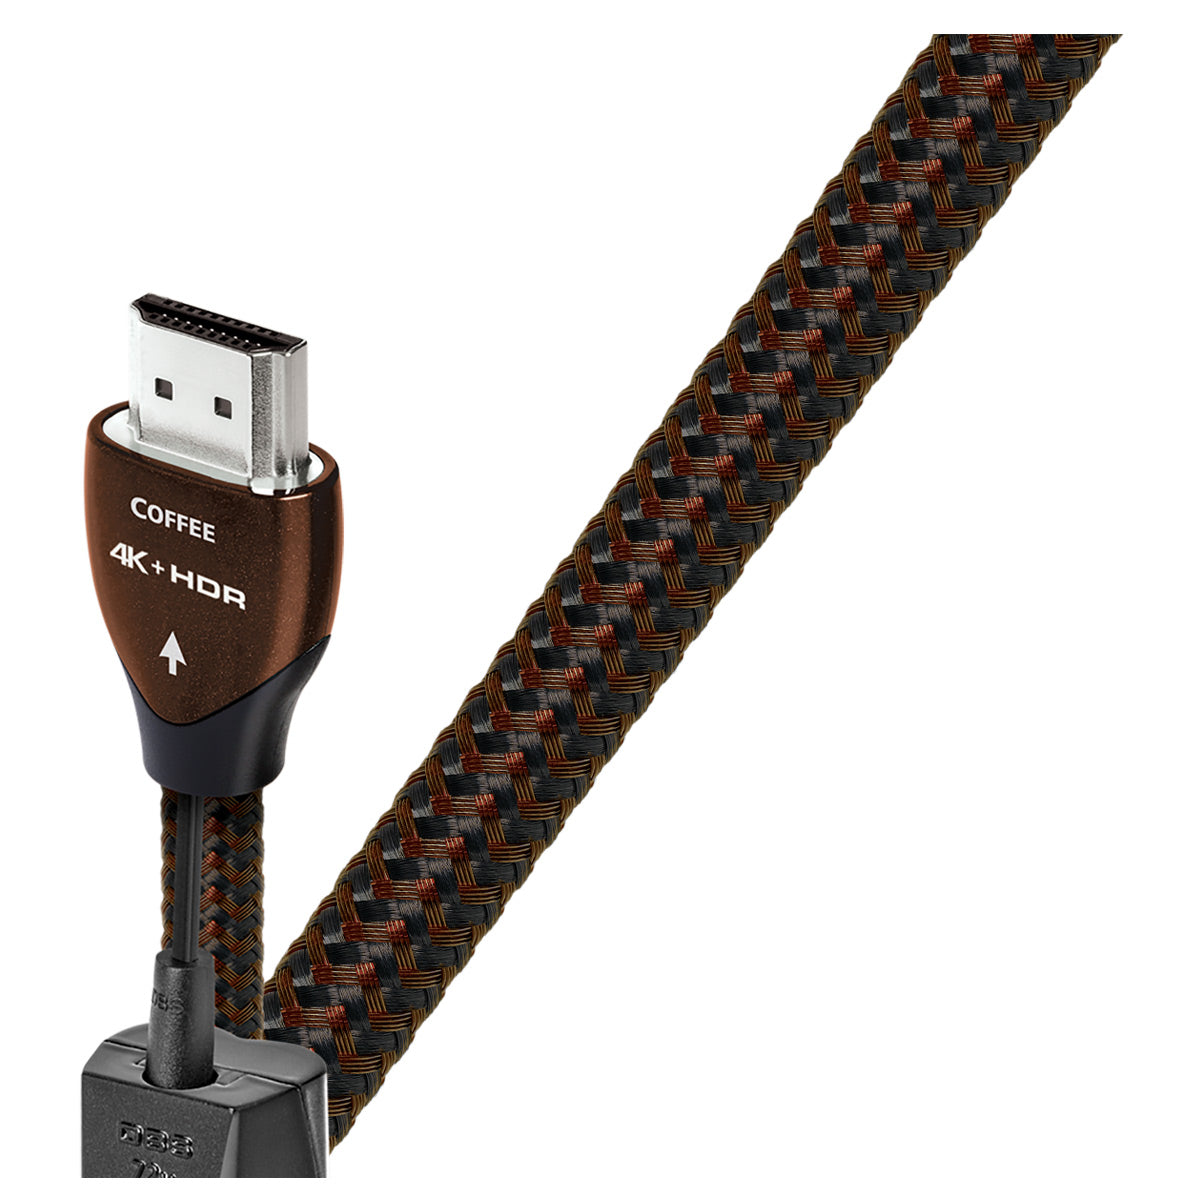 AudioQuest Coffee HDMI Cable - 6.56 ft. (2m)